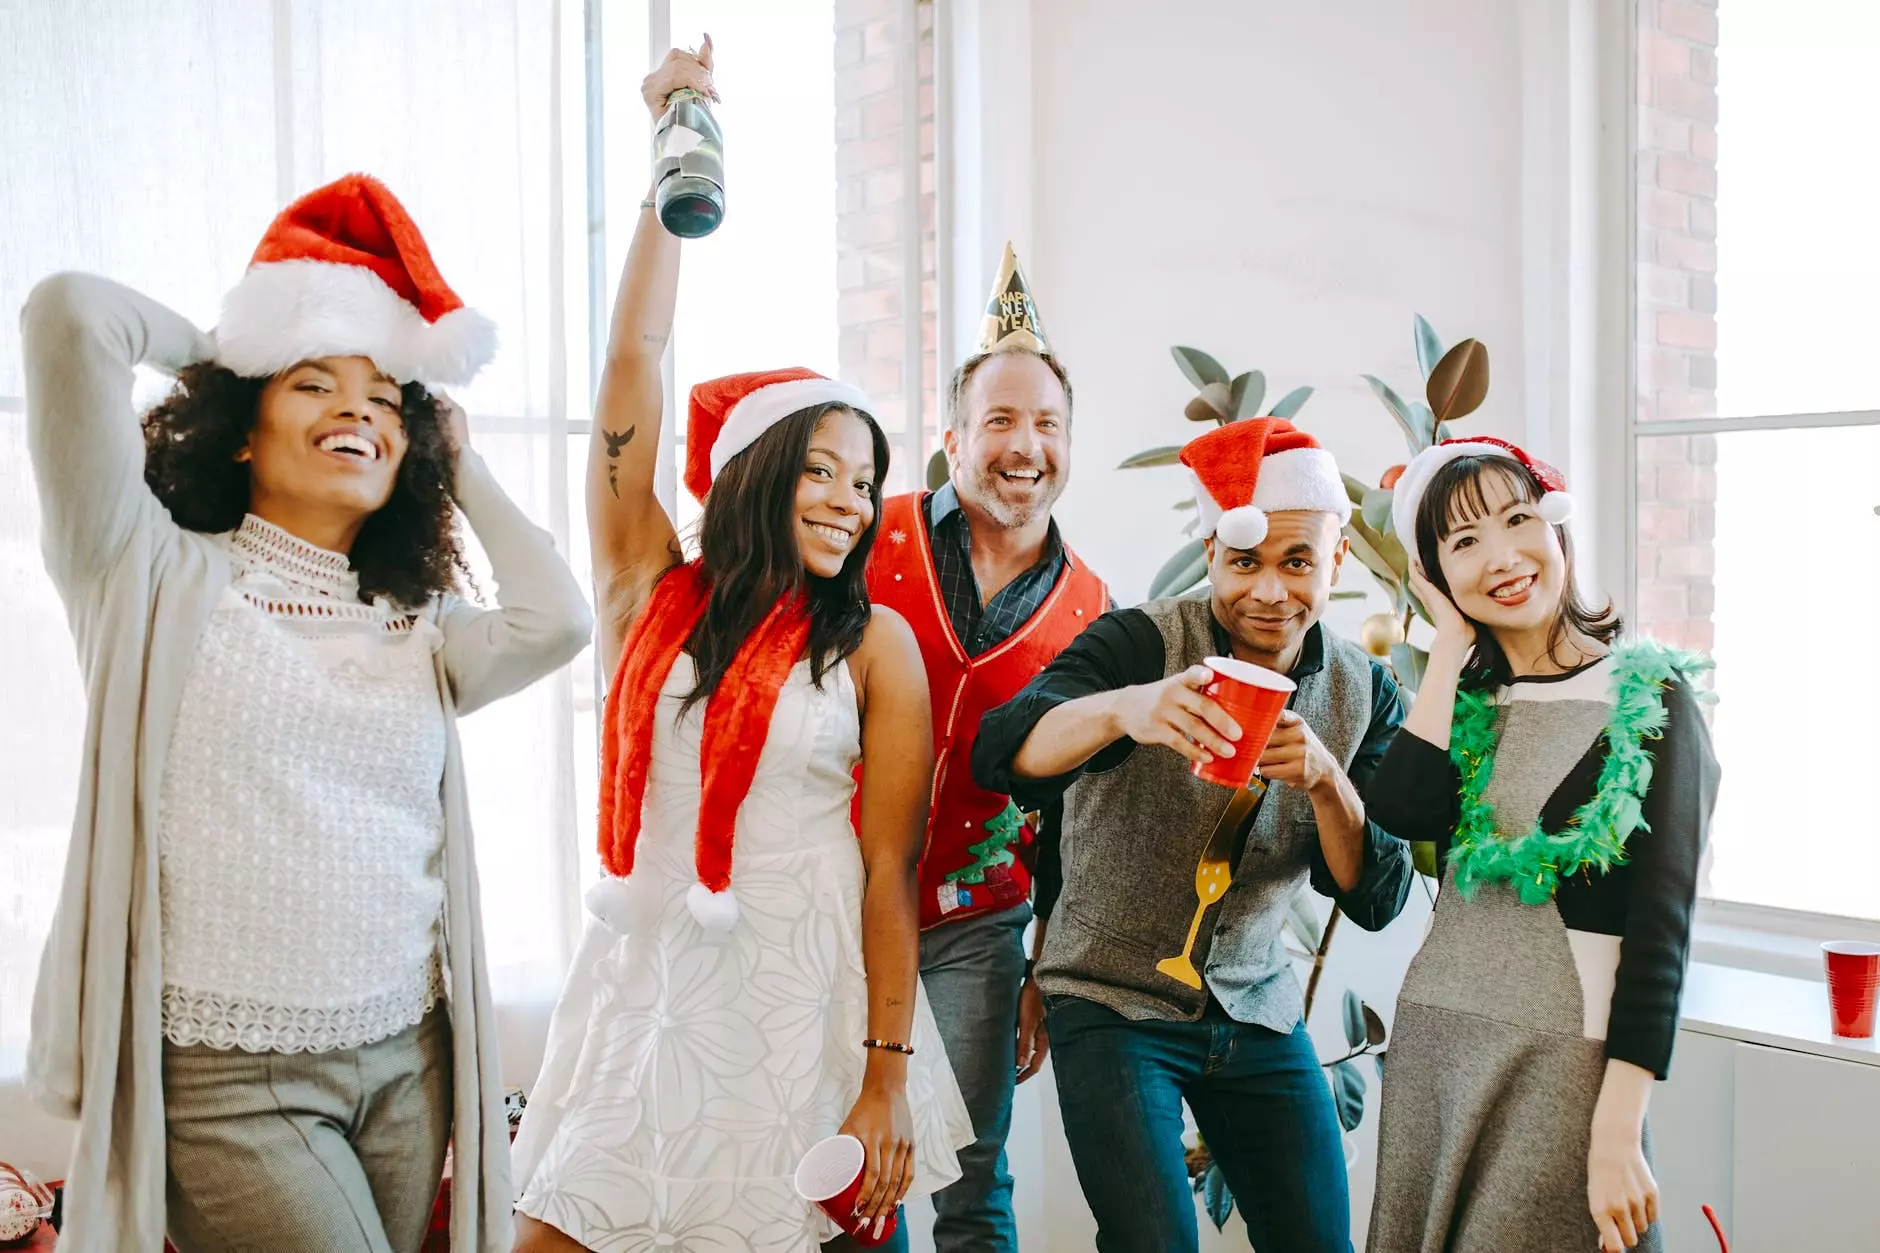 New Year’s Party Items: 10 Best Ideas to Consider